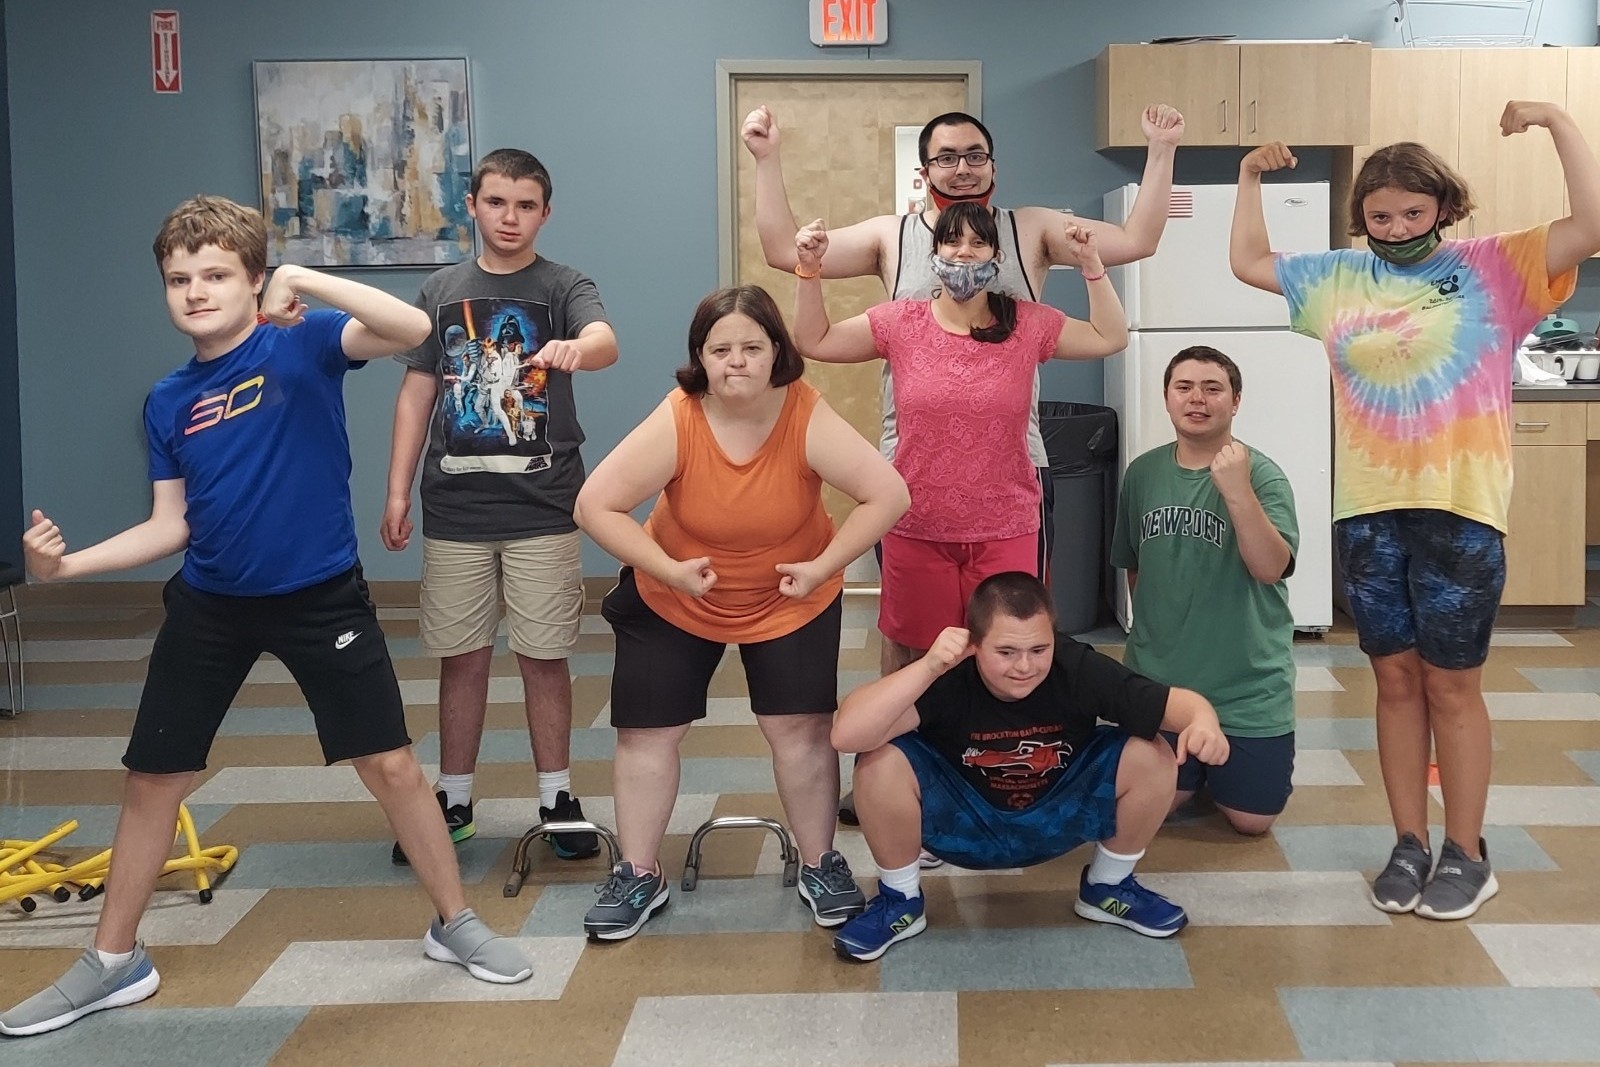 Participants in fitness class